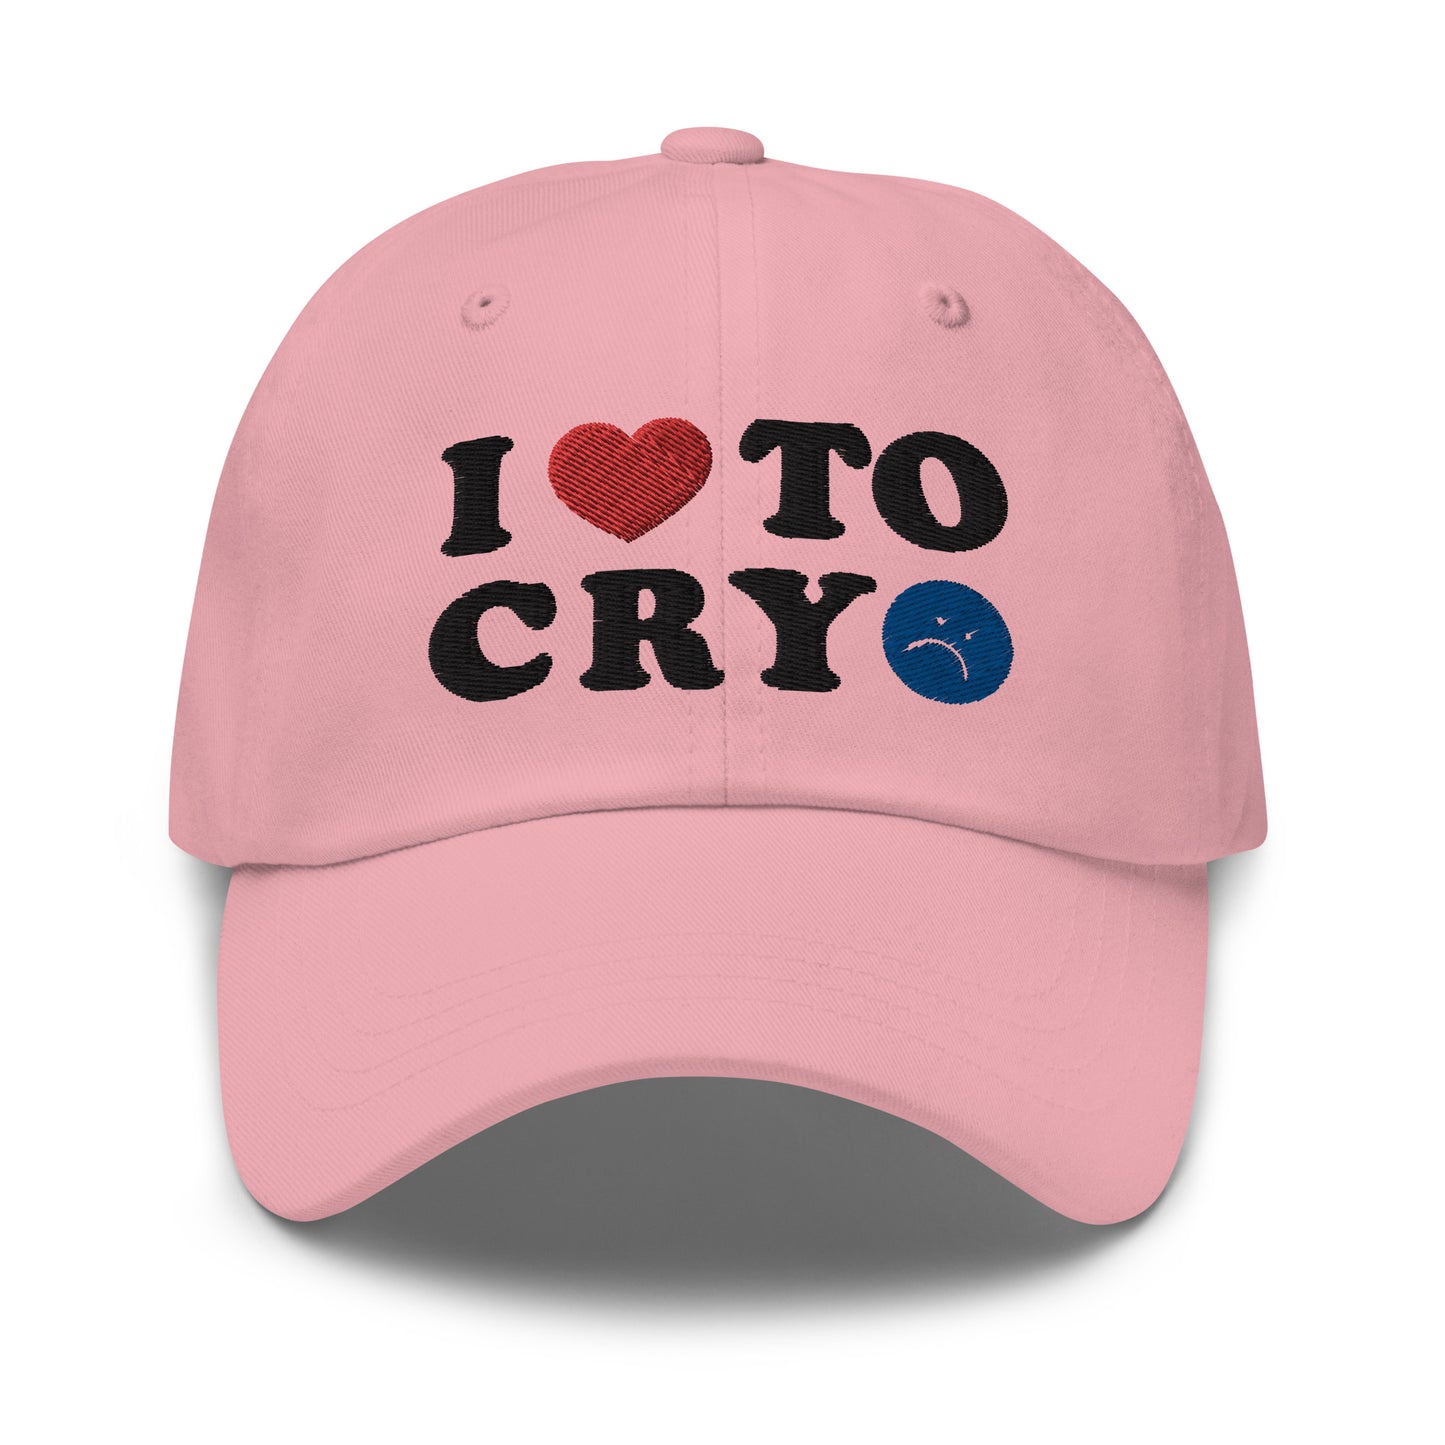 I HEART TO CRY DAD HAT